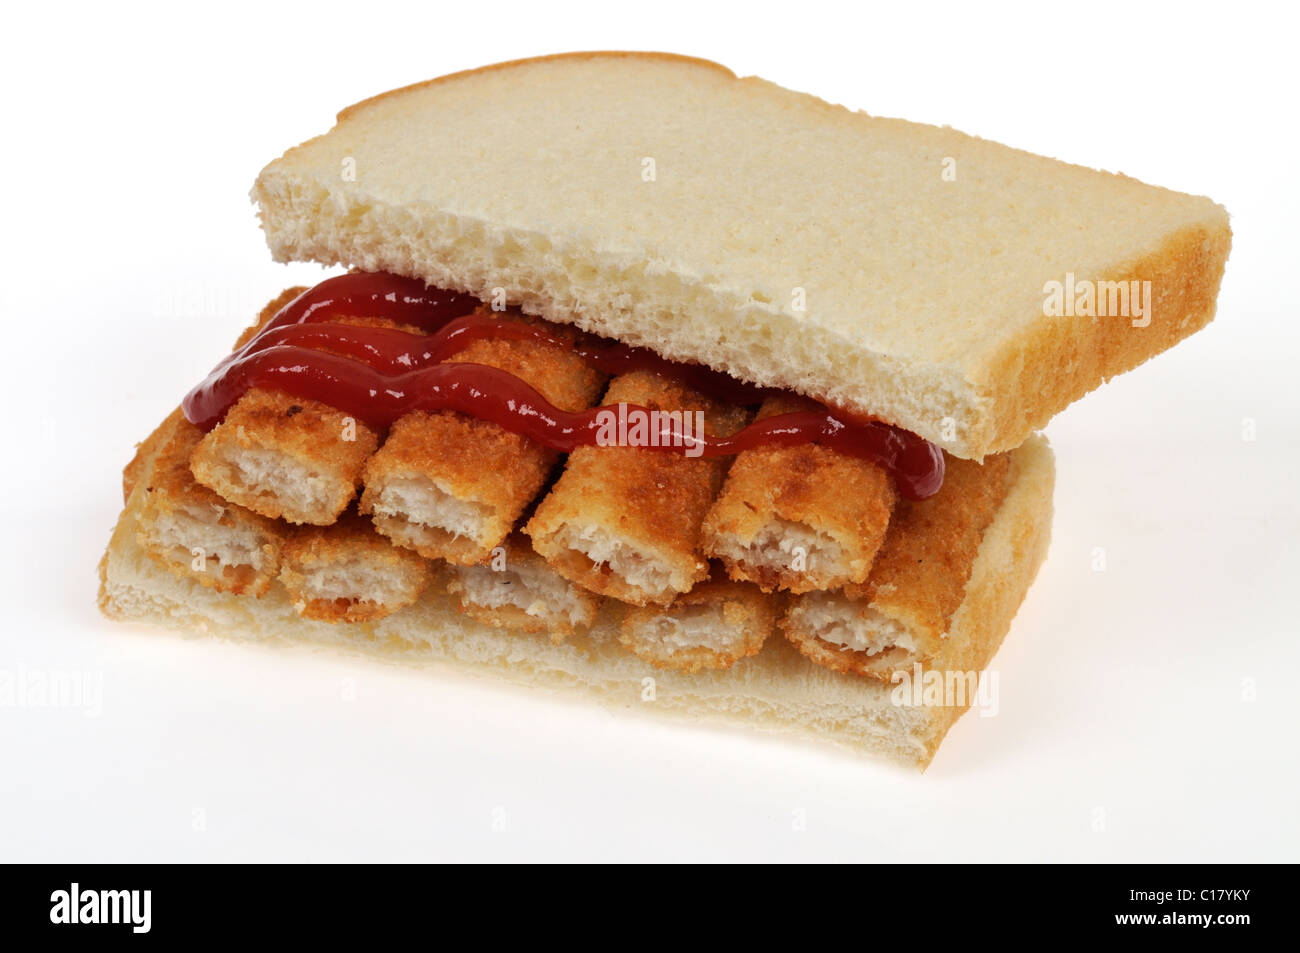 https://c8.alamy.com/comp/C17YKY/fish-finger-sandwich-with-white-bread-and-ketchup-on-white-background-C17YKY.jpg